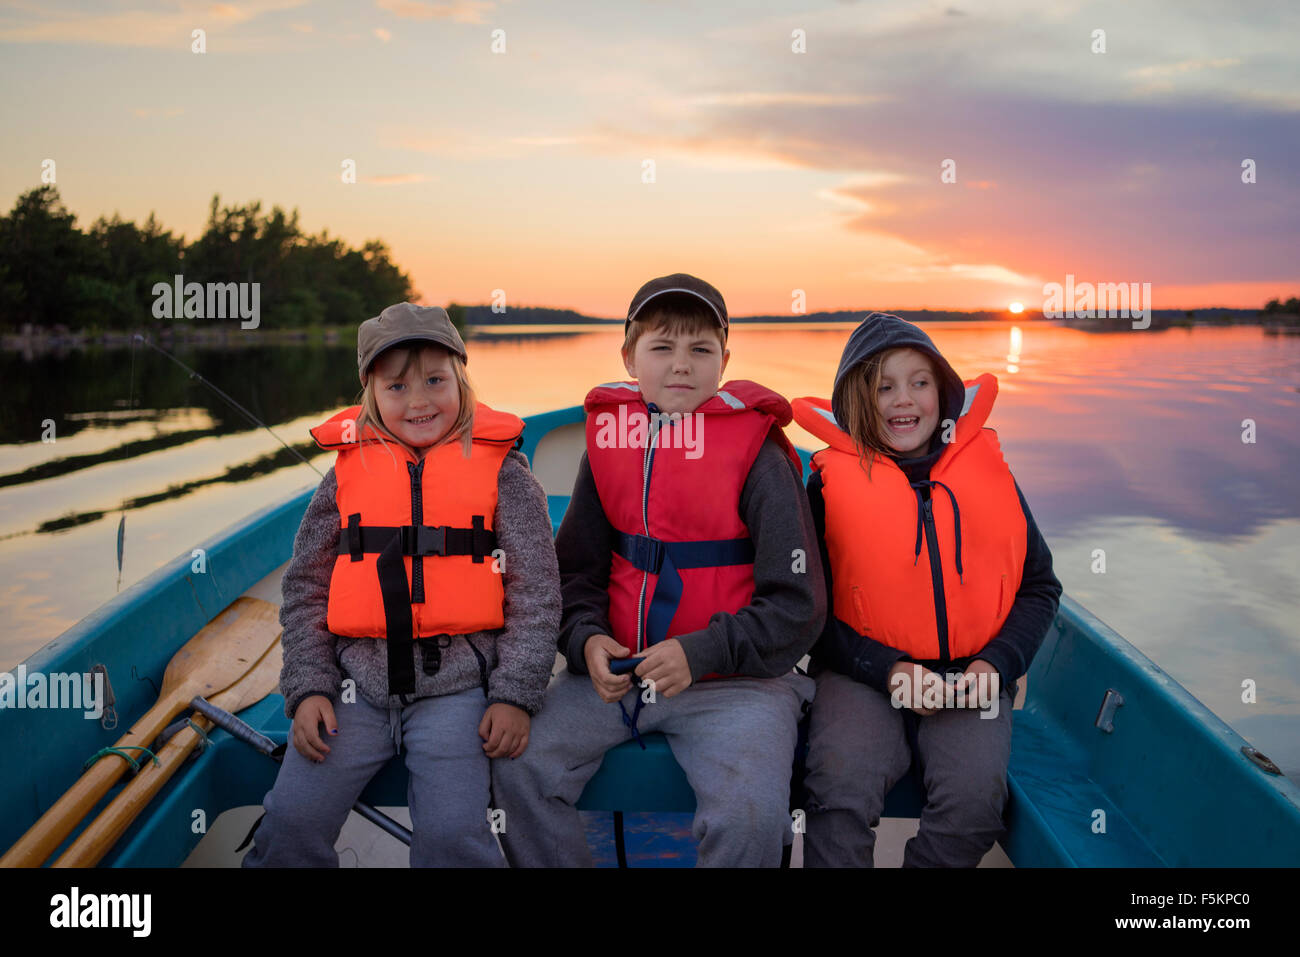 Children (4-5, 8-9, 10-11) wearing life jackets sitting in rowboat at sunset. Sweden Stock Photo